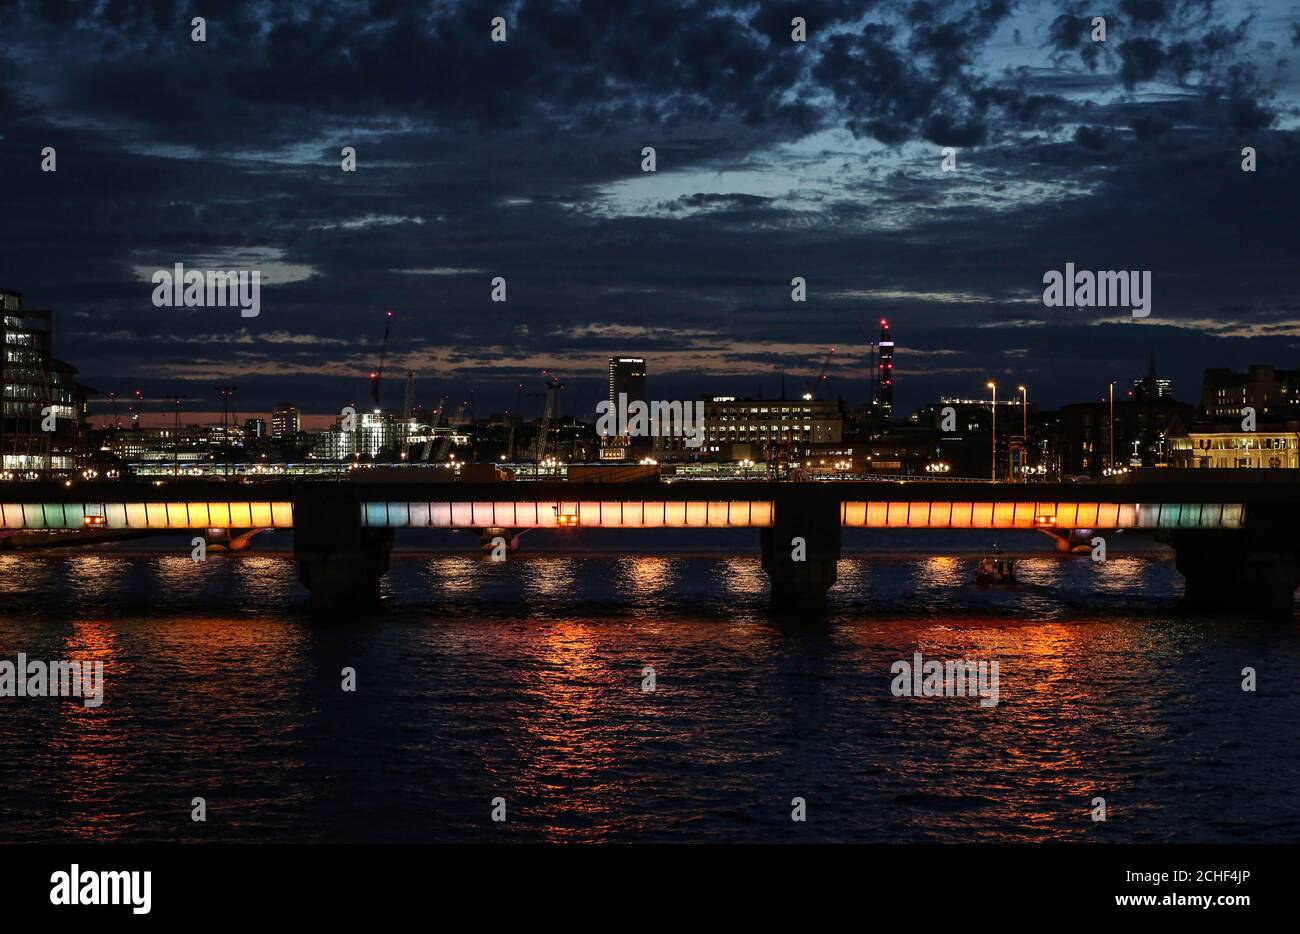 A general view of Cannon Street Railway Bridge, which is one of the four bridges that have been transformed to launch the first phase of Illuminated River, an ambitious new public art commission for London that will eventually see up to 15 bridges lit along the Thames. PRESS ASSOCIATION. Issue date: Wednesday July 17, 2019. Conceived by American artist Leo Villareal, and British architectural practice Lifschutz Davidson Sandilands, Illuminated River is a philanthropically-funded initiative supported by the Mayor of London and delivered by the Illuminated River Foundation. It Stock Photo